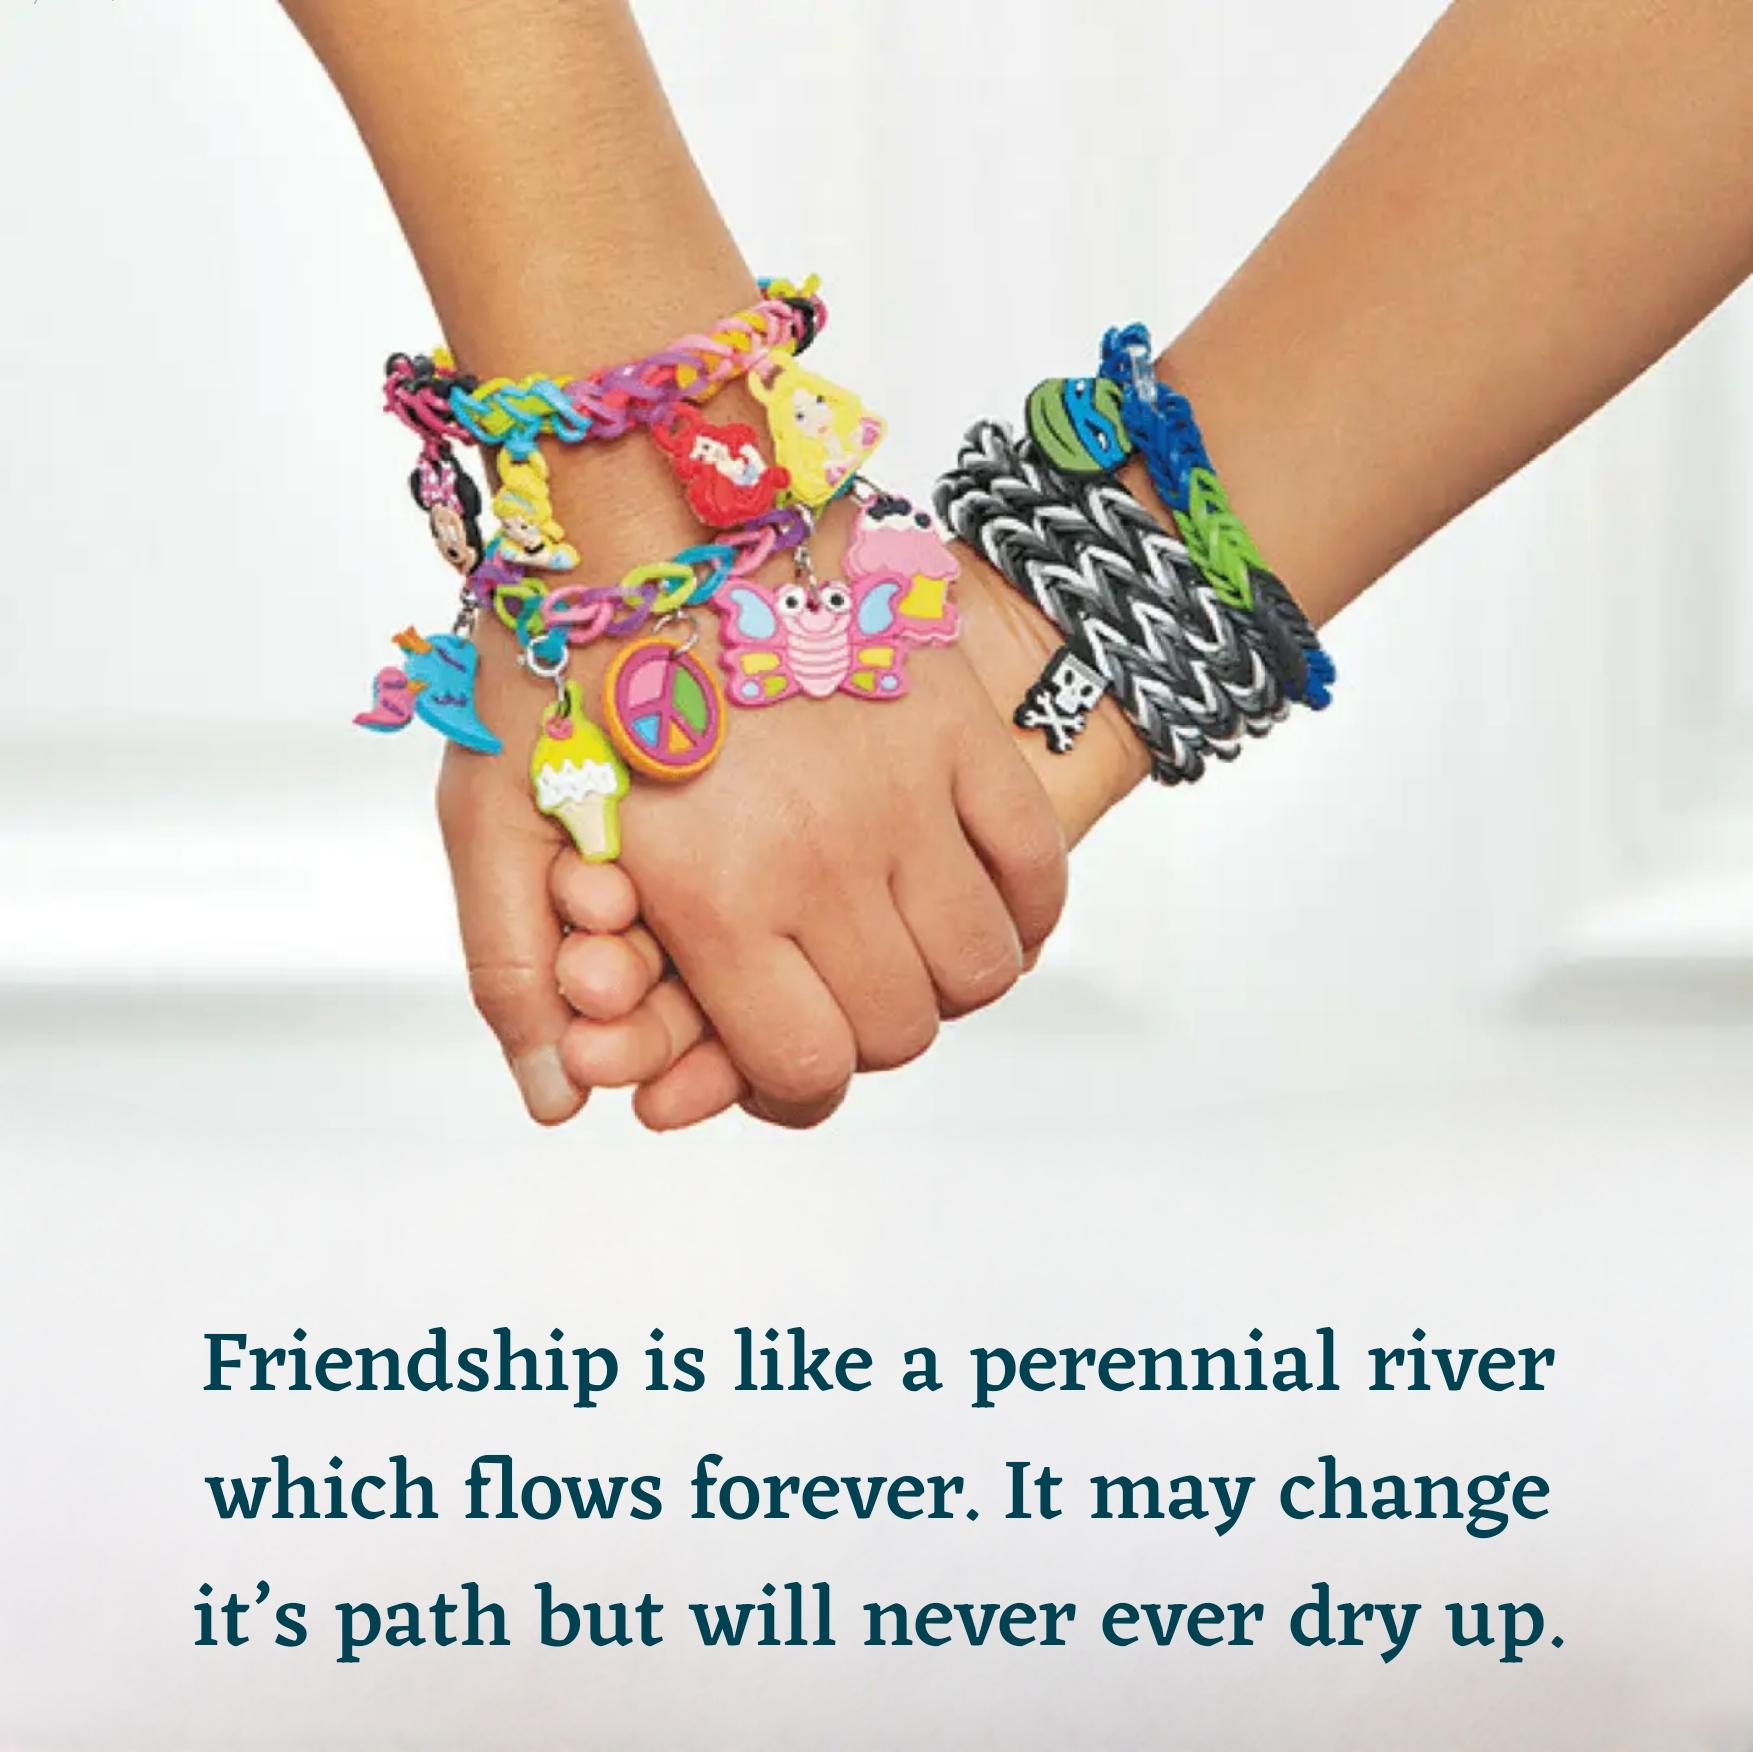 Friendship is like a perennial river which flows forever